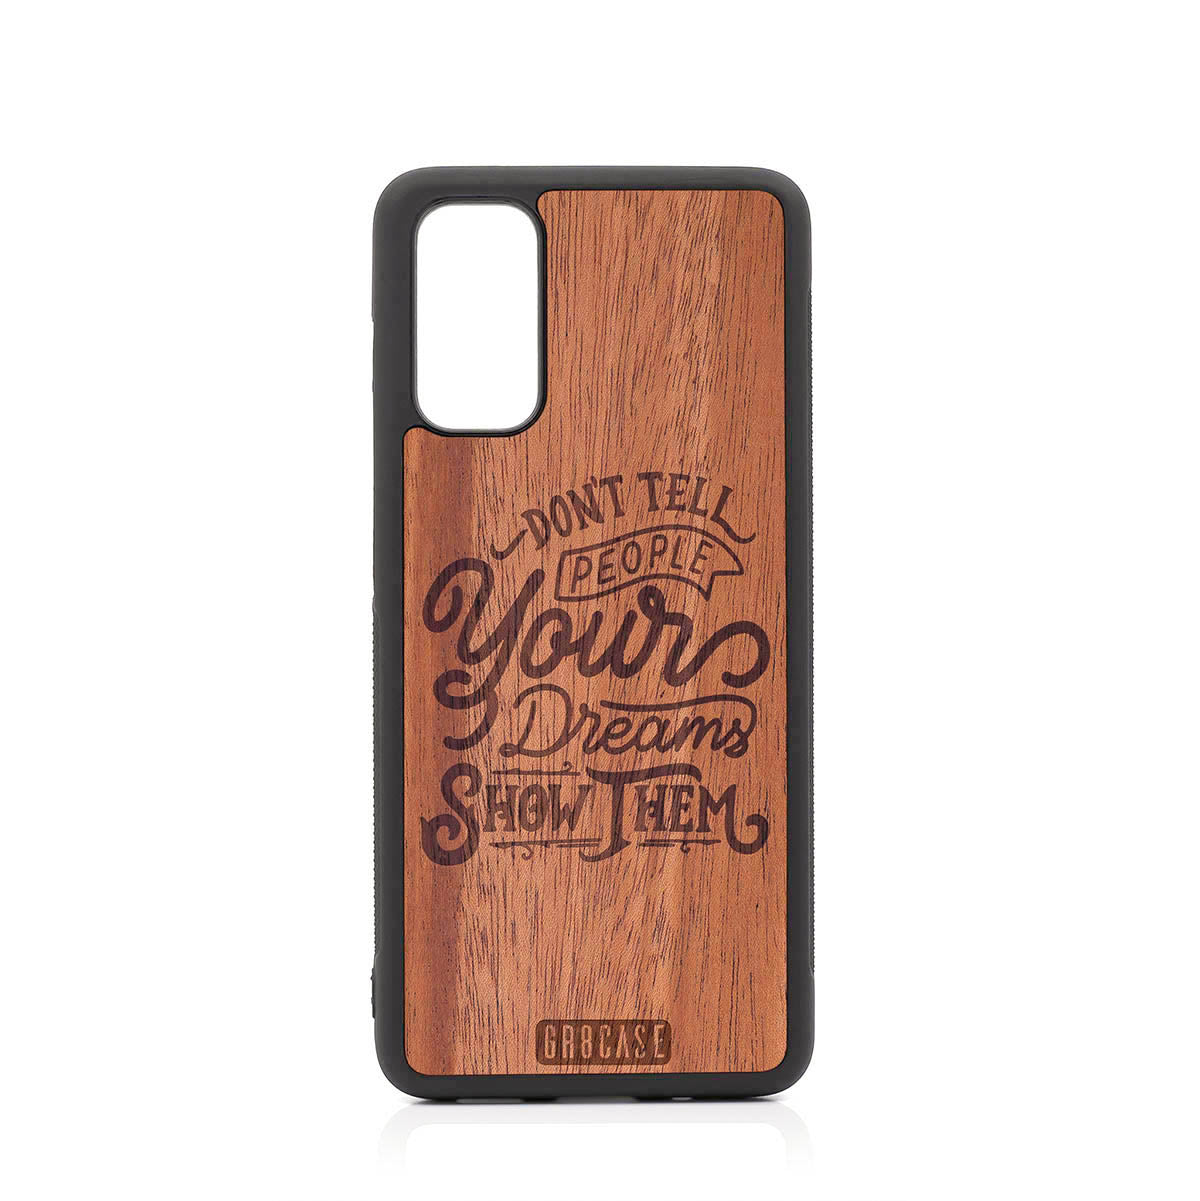 Don't Tell People Your Dreams Show Them Design Wood Case For Samsung Galaxy S20 by GR8CASE